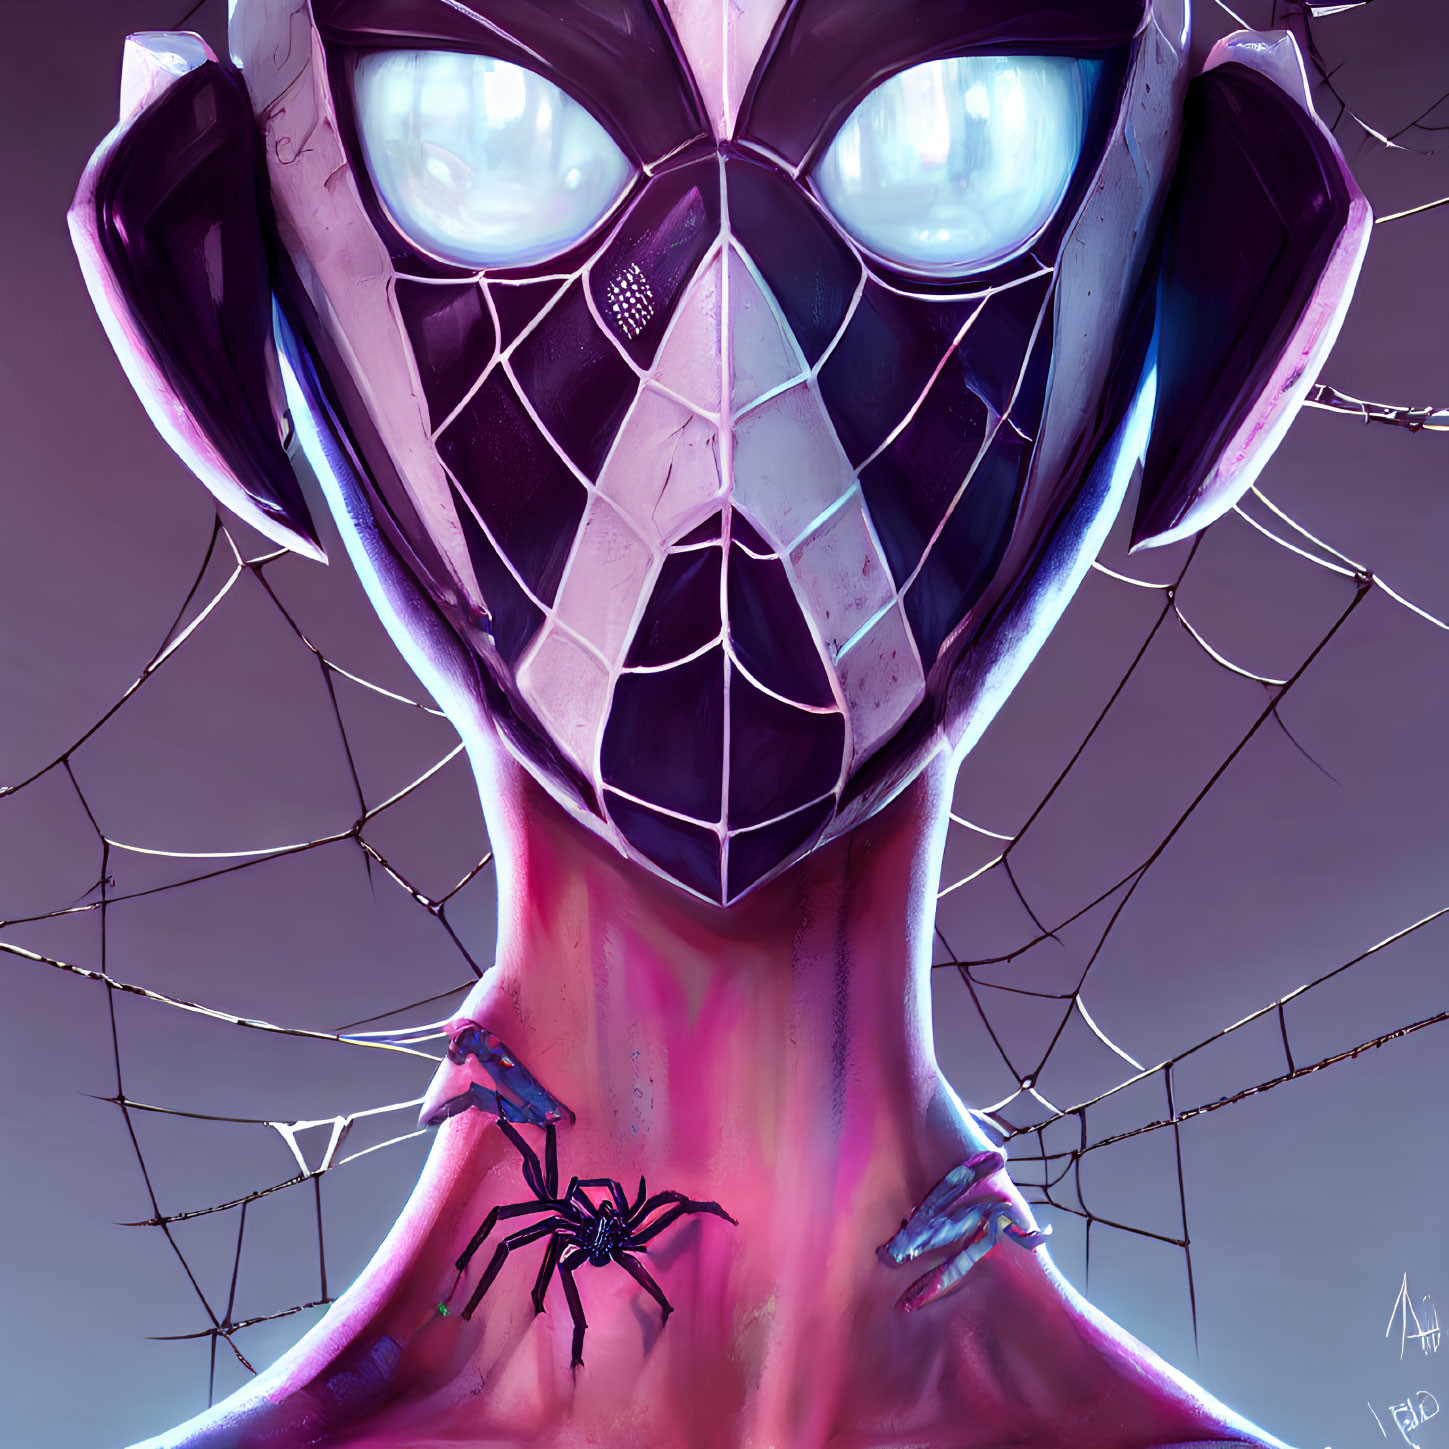 Character with Spider-Themed Mask and Glowing Eyes Illustration